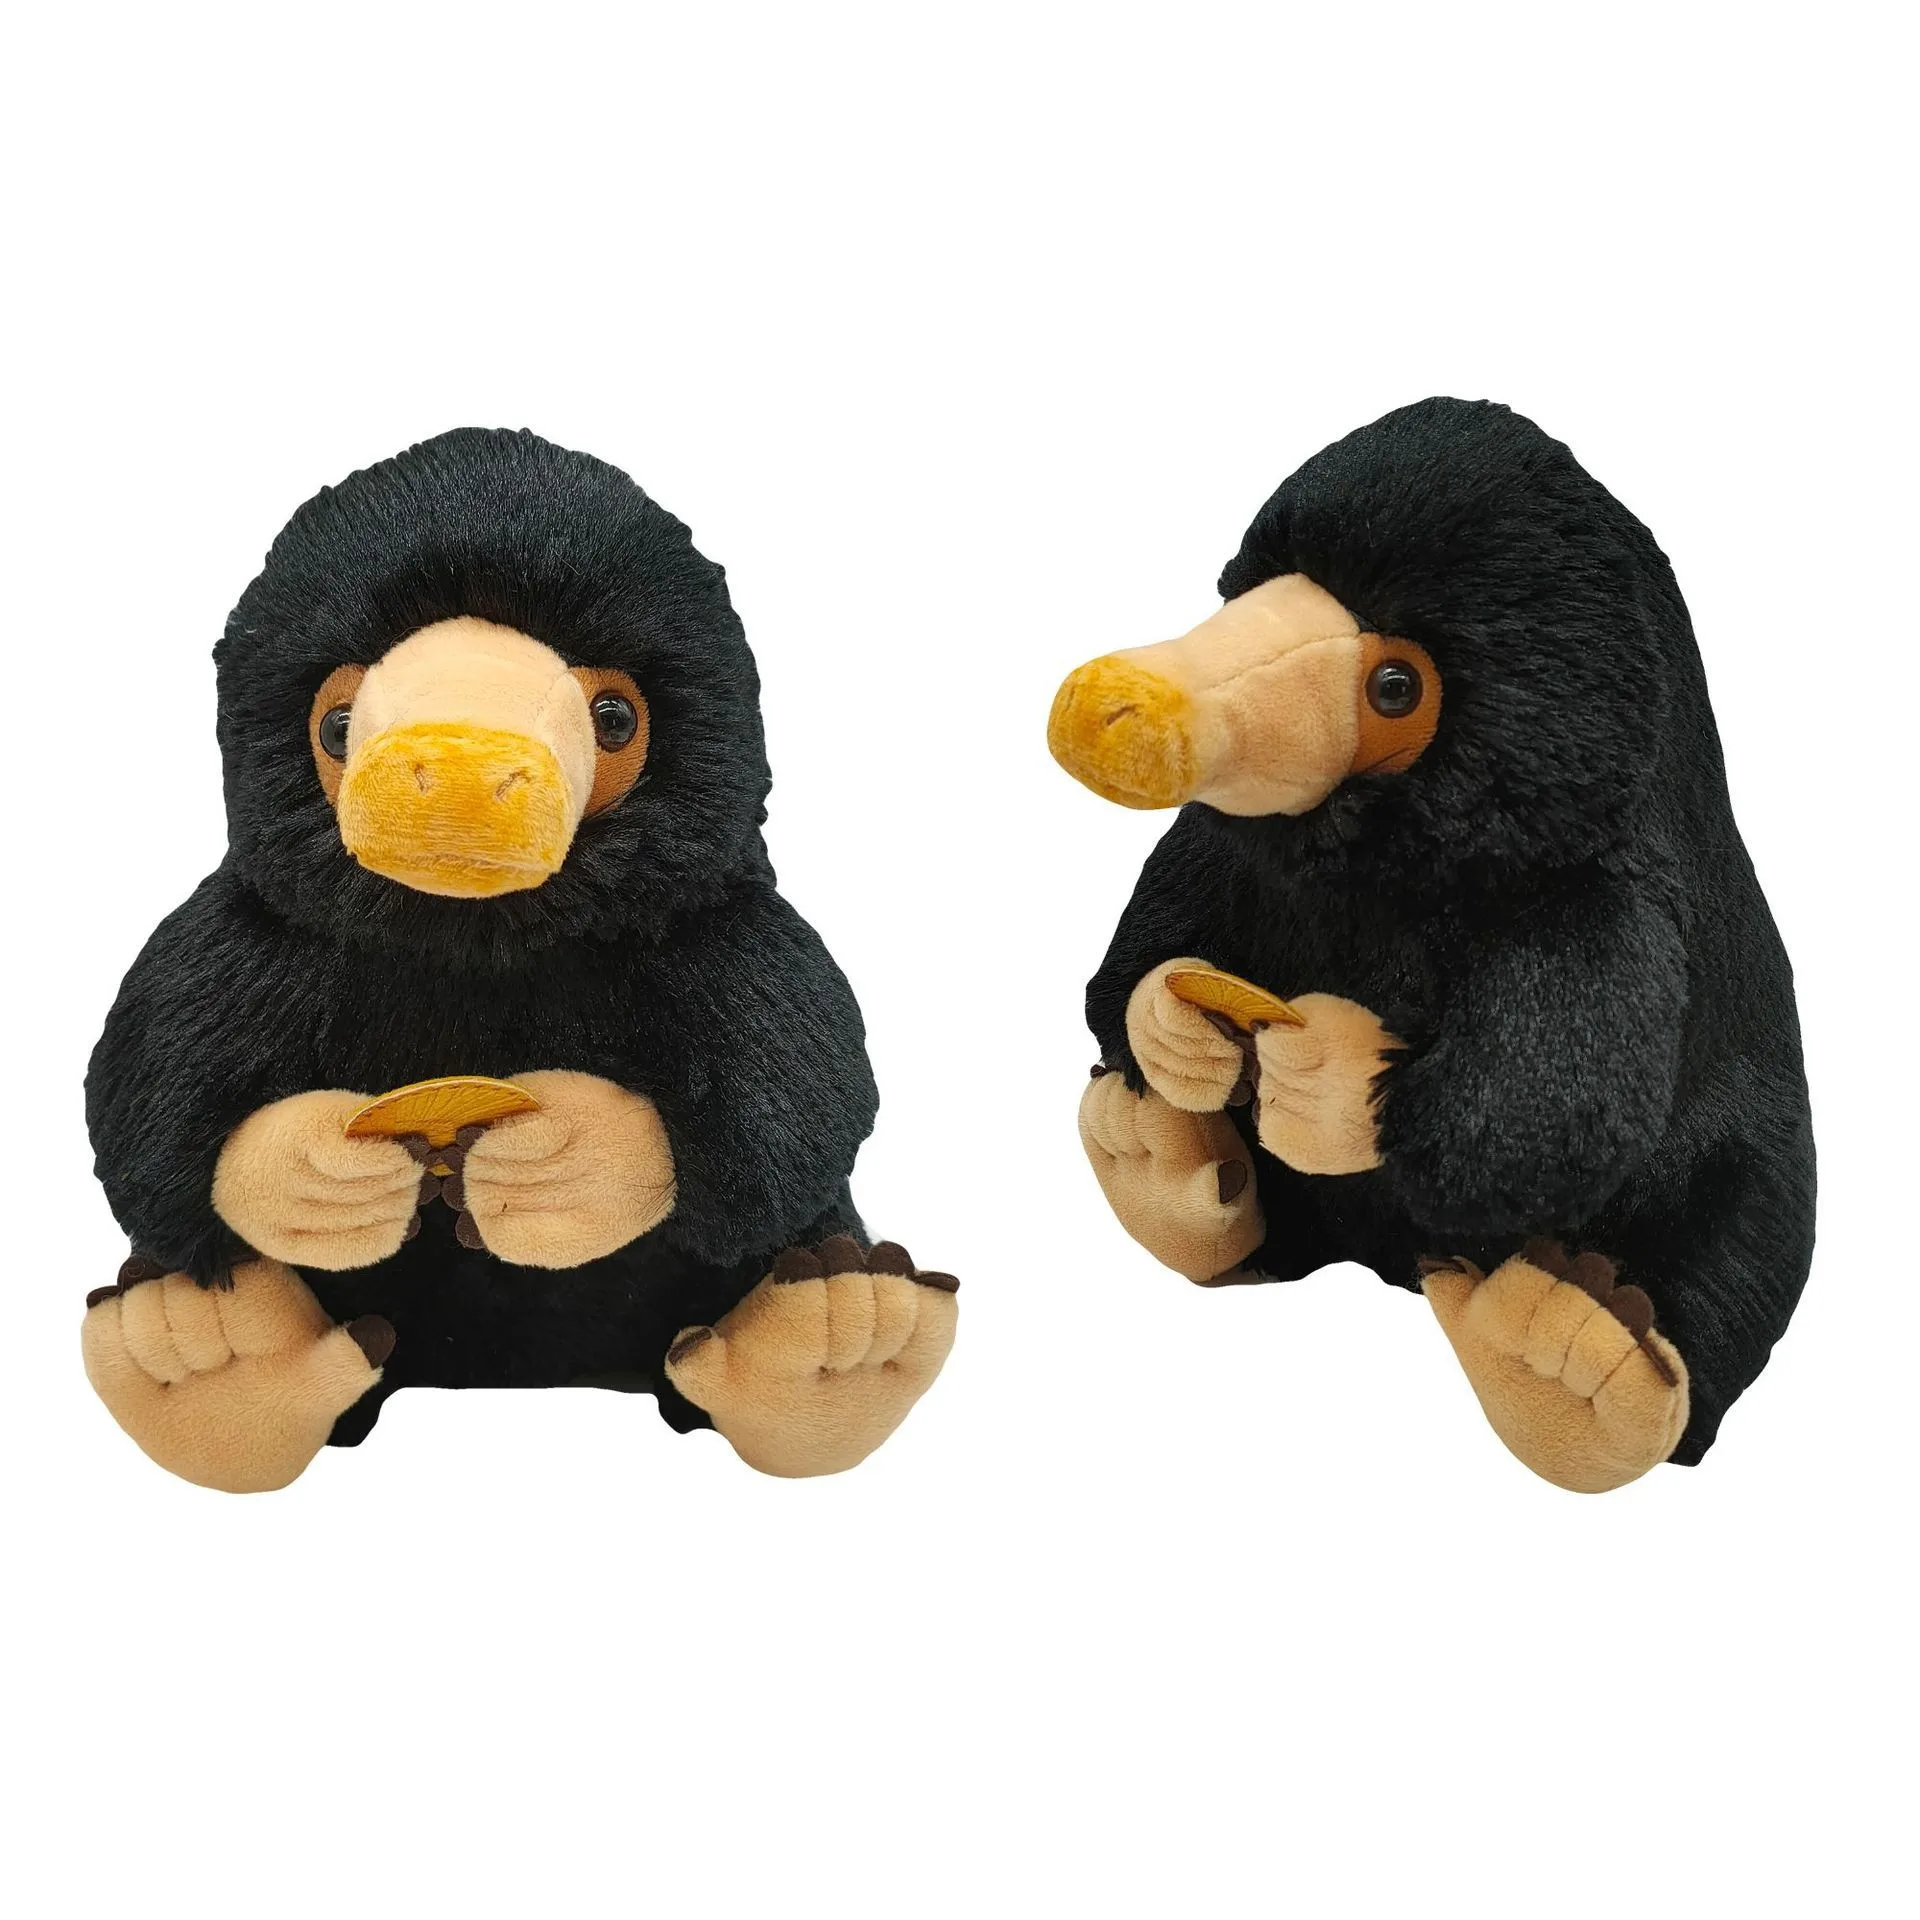 

Fantastic Beasts and Where to Find Them Niffler Doll Plush Toy Black Duckbills Soft Stuffed Animals For Kids Birthday Gift